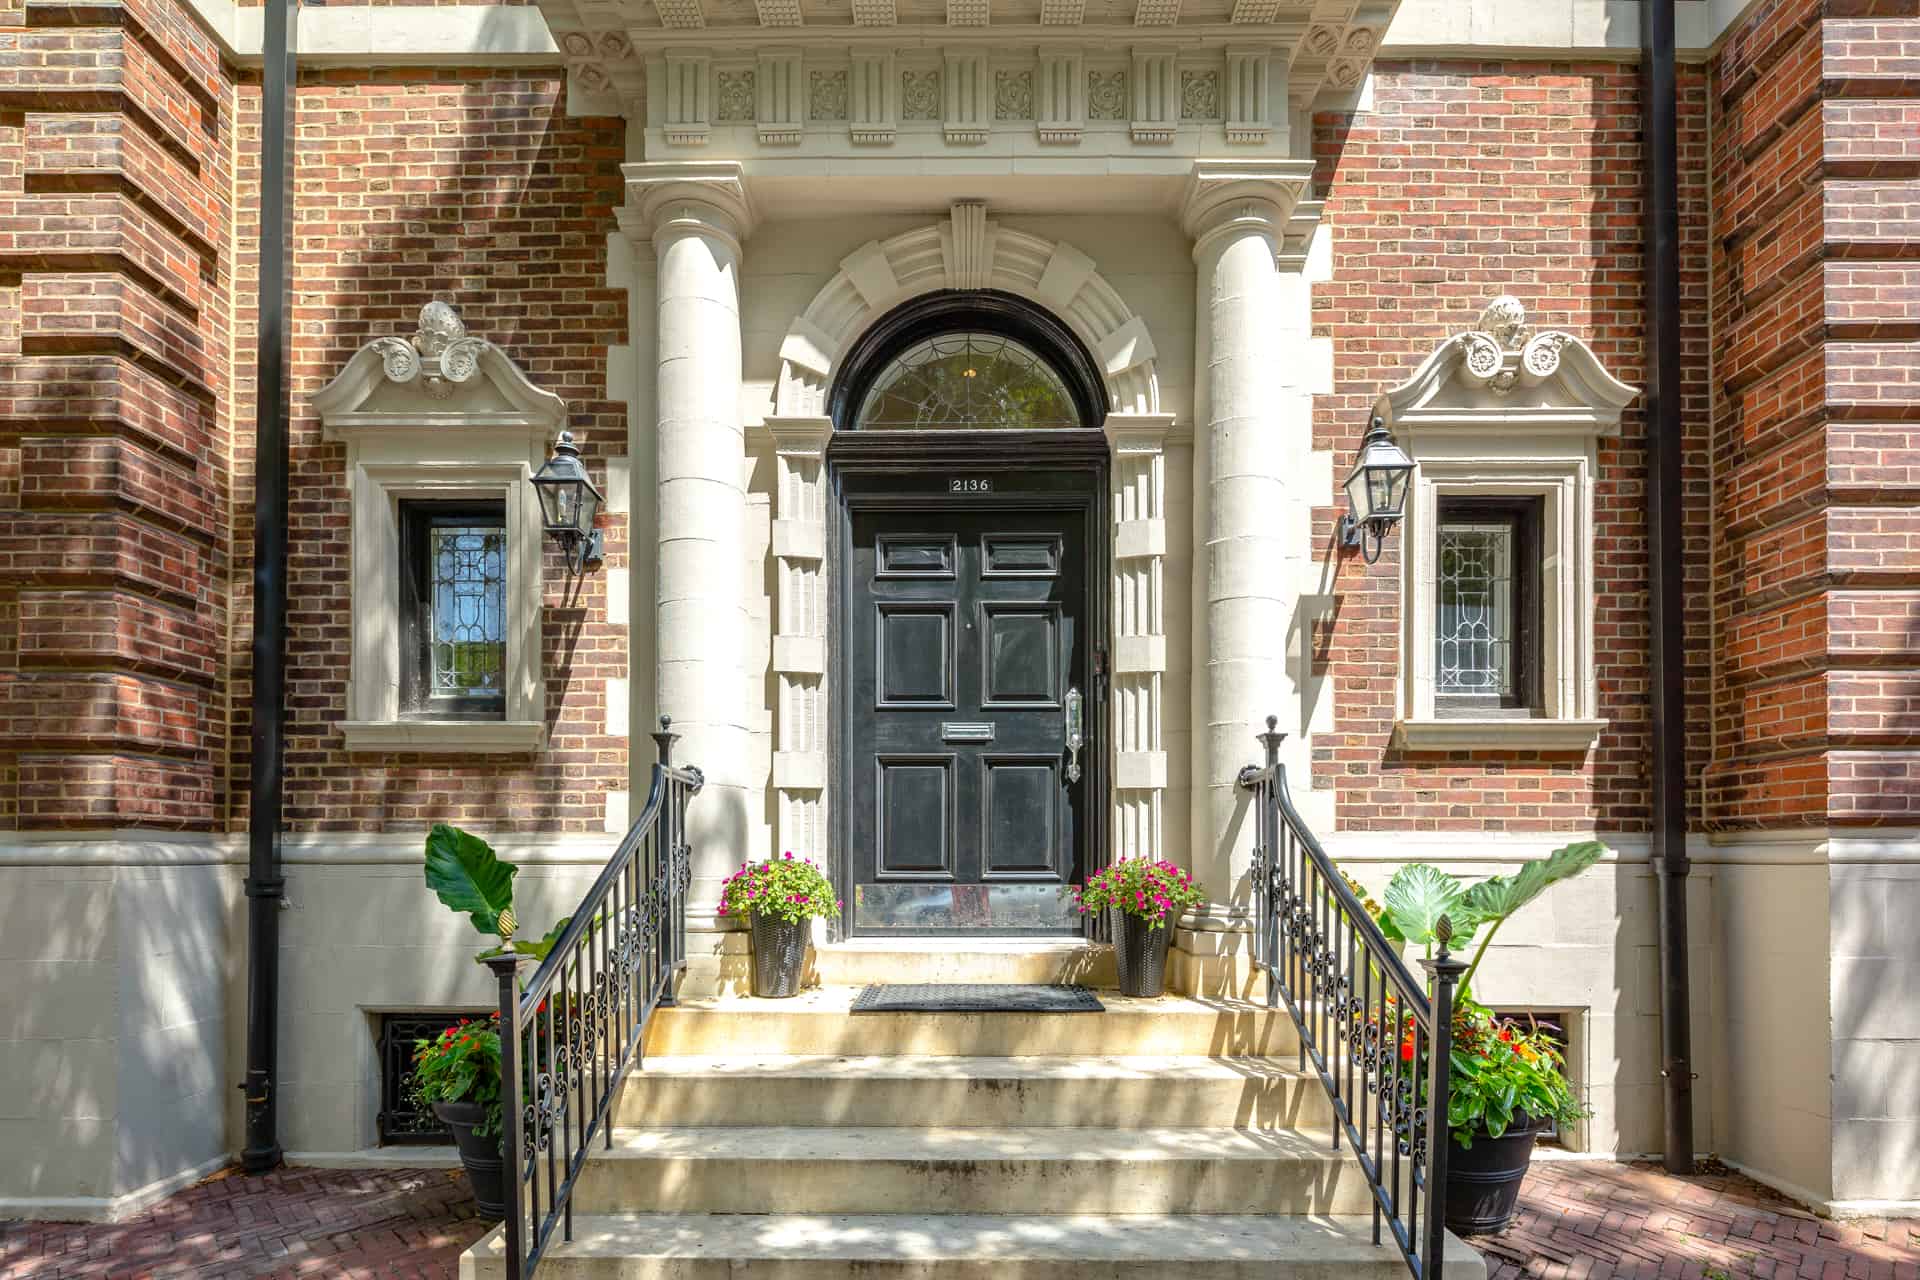 Real Estate Photograph of a Luxury Mansion on Spruce Street in Philadelphia, PA